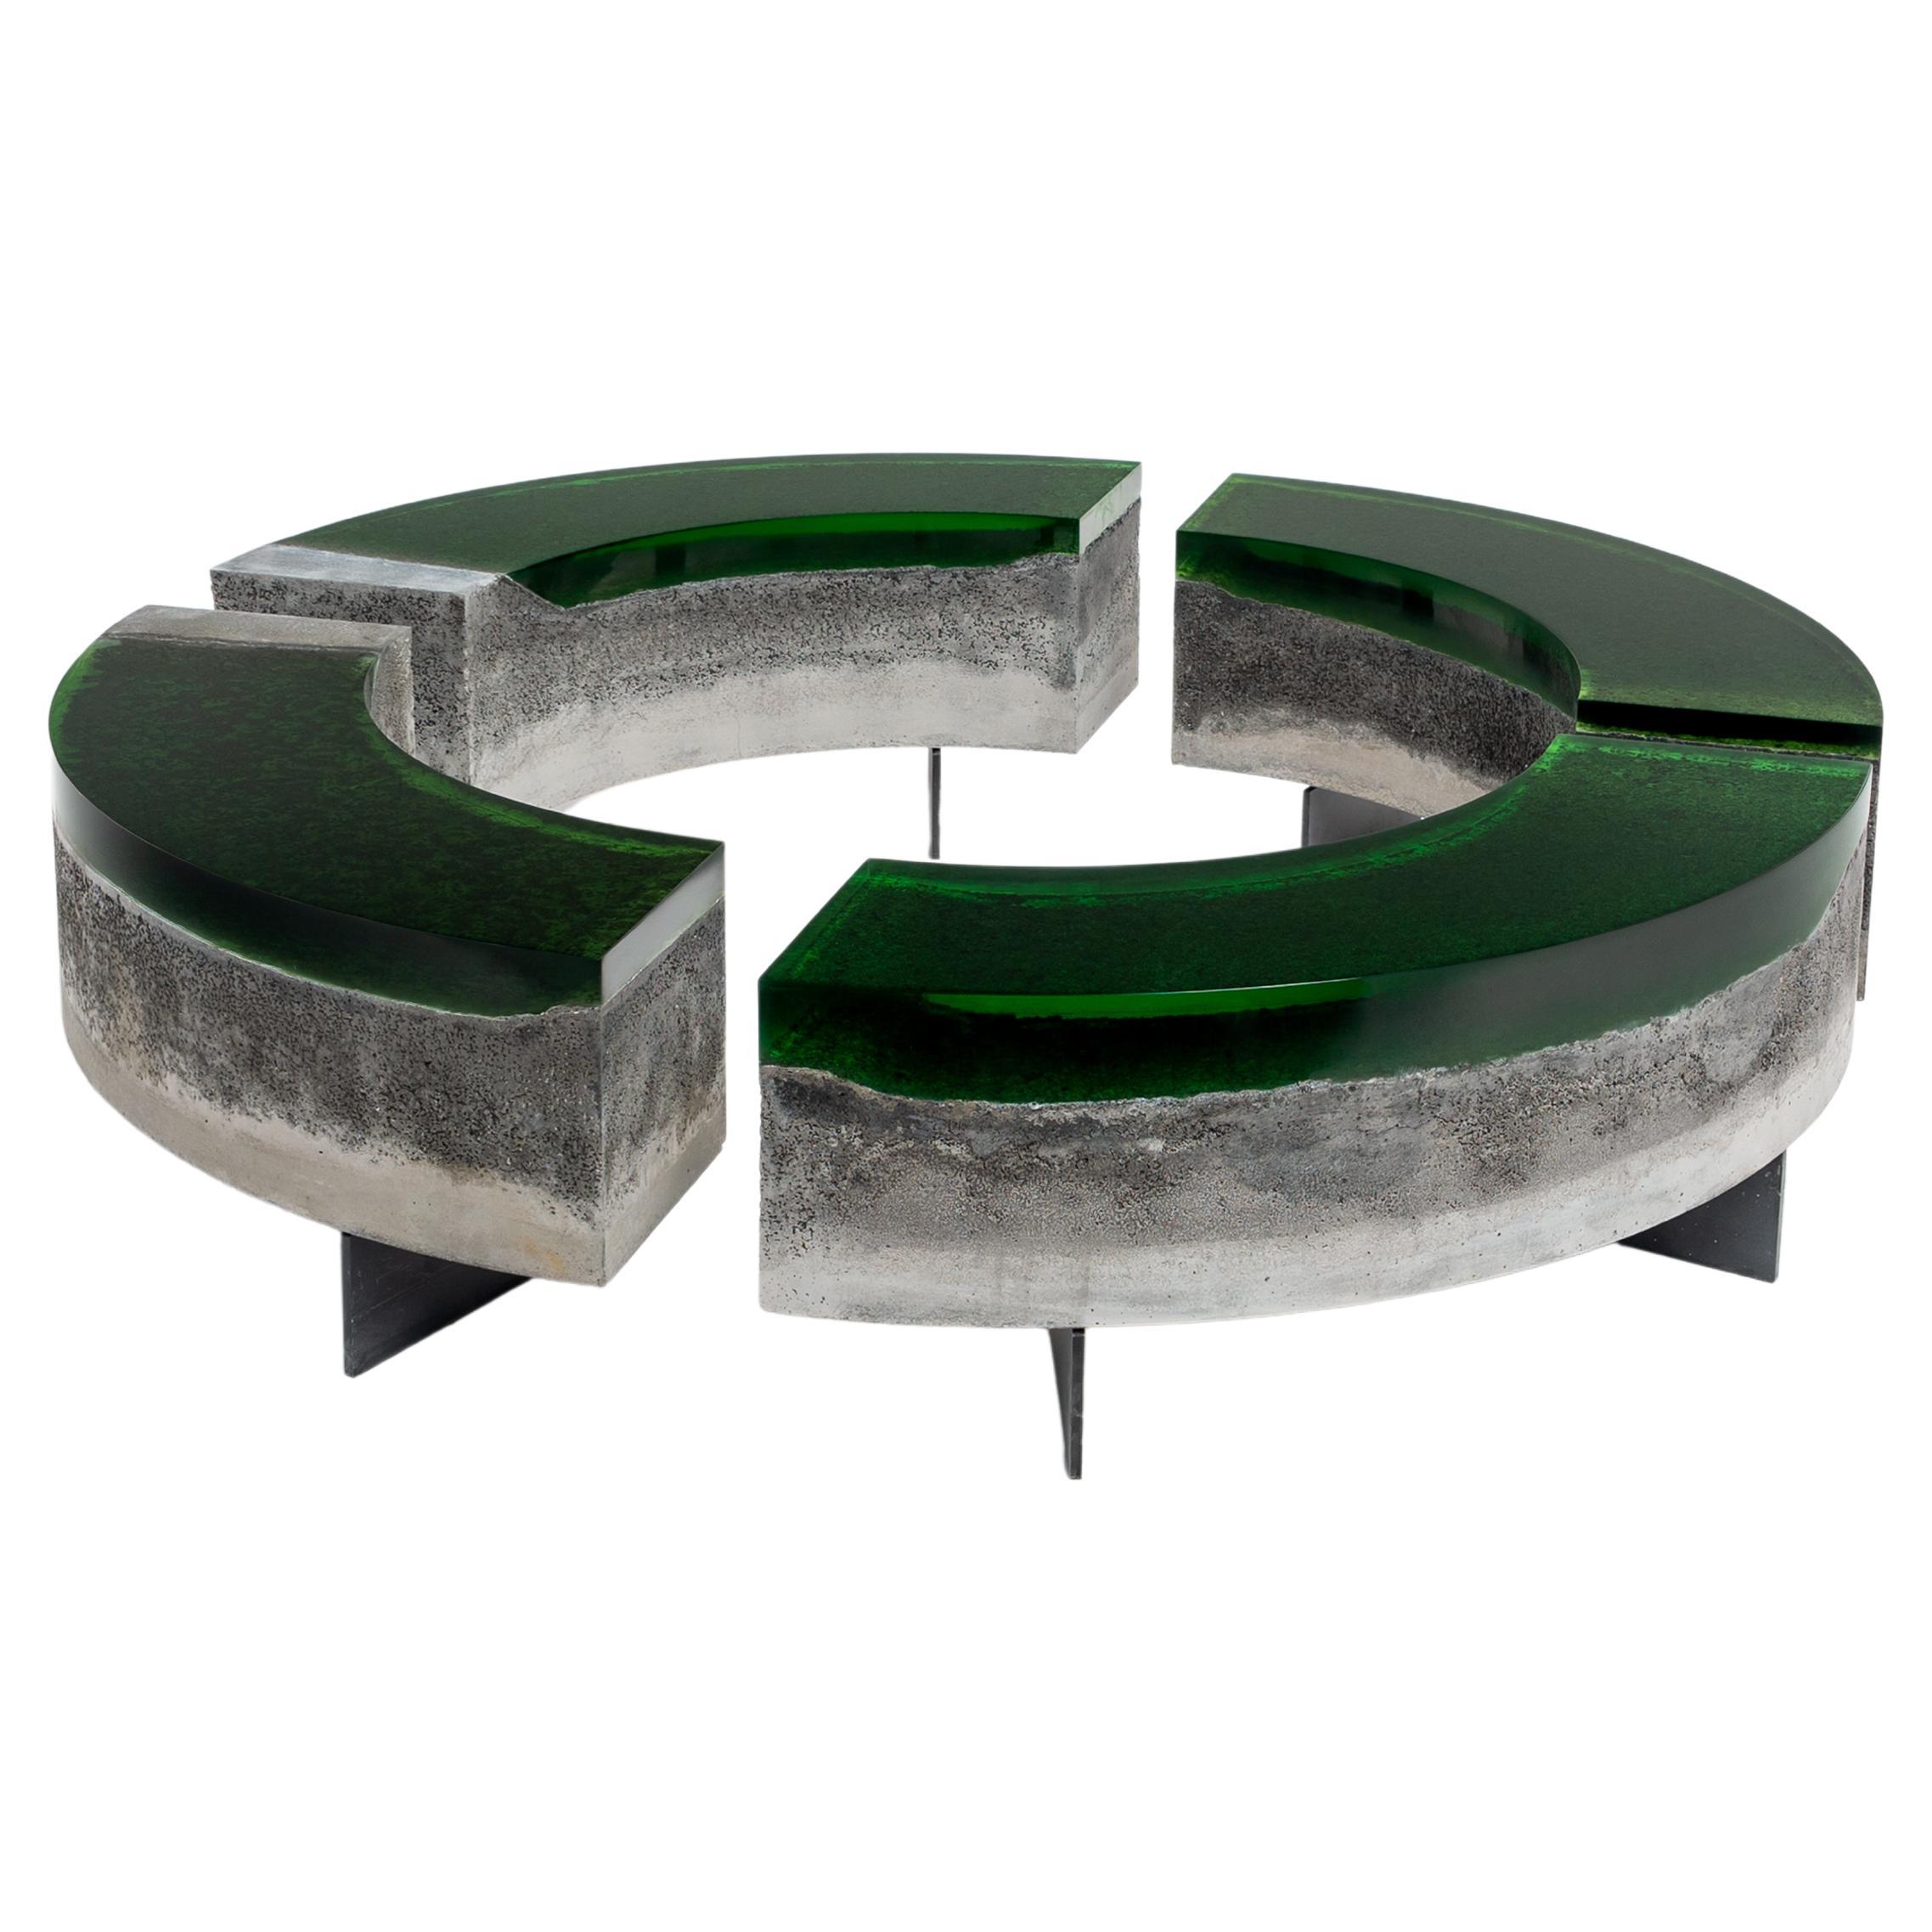 Cala Bench by Draga&Aurel Resin and Concrete, 21st Century For Sale